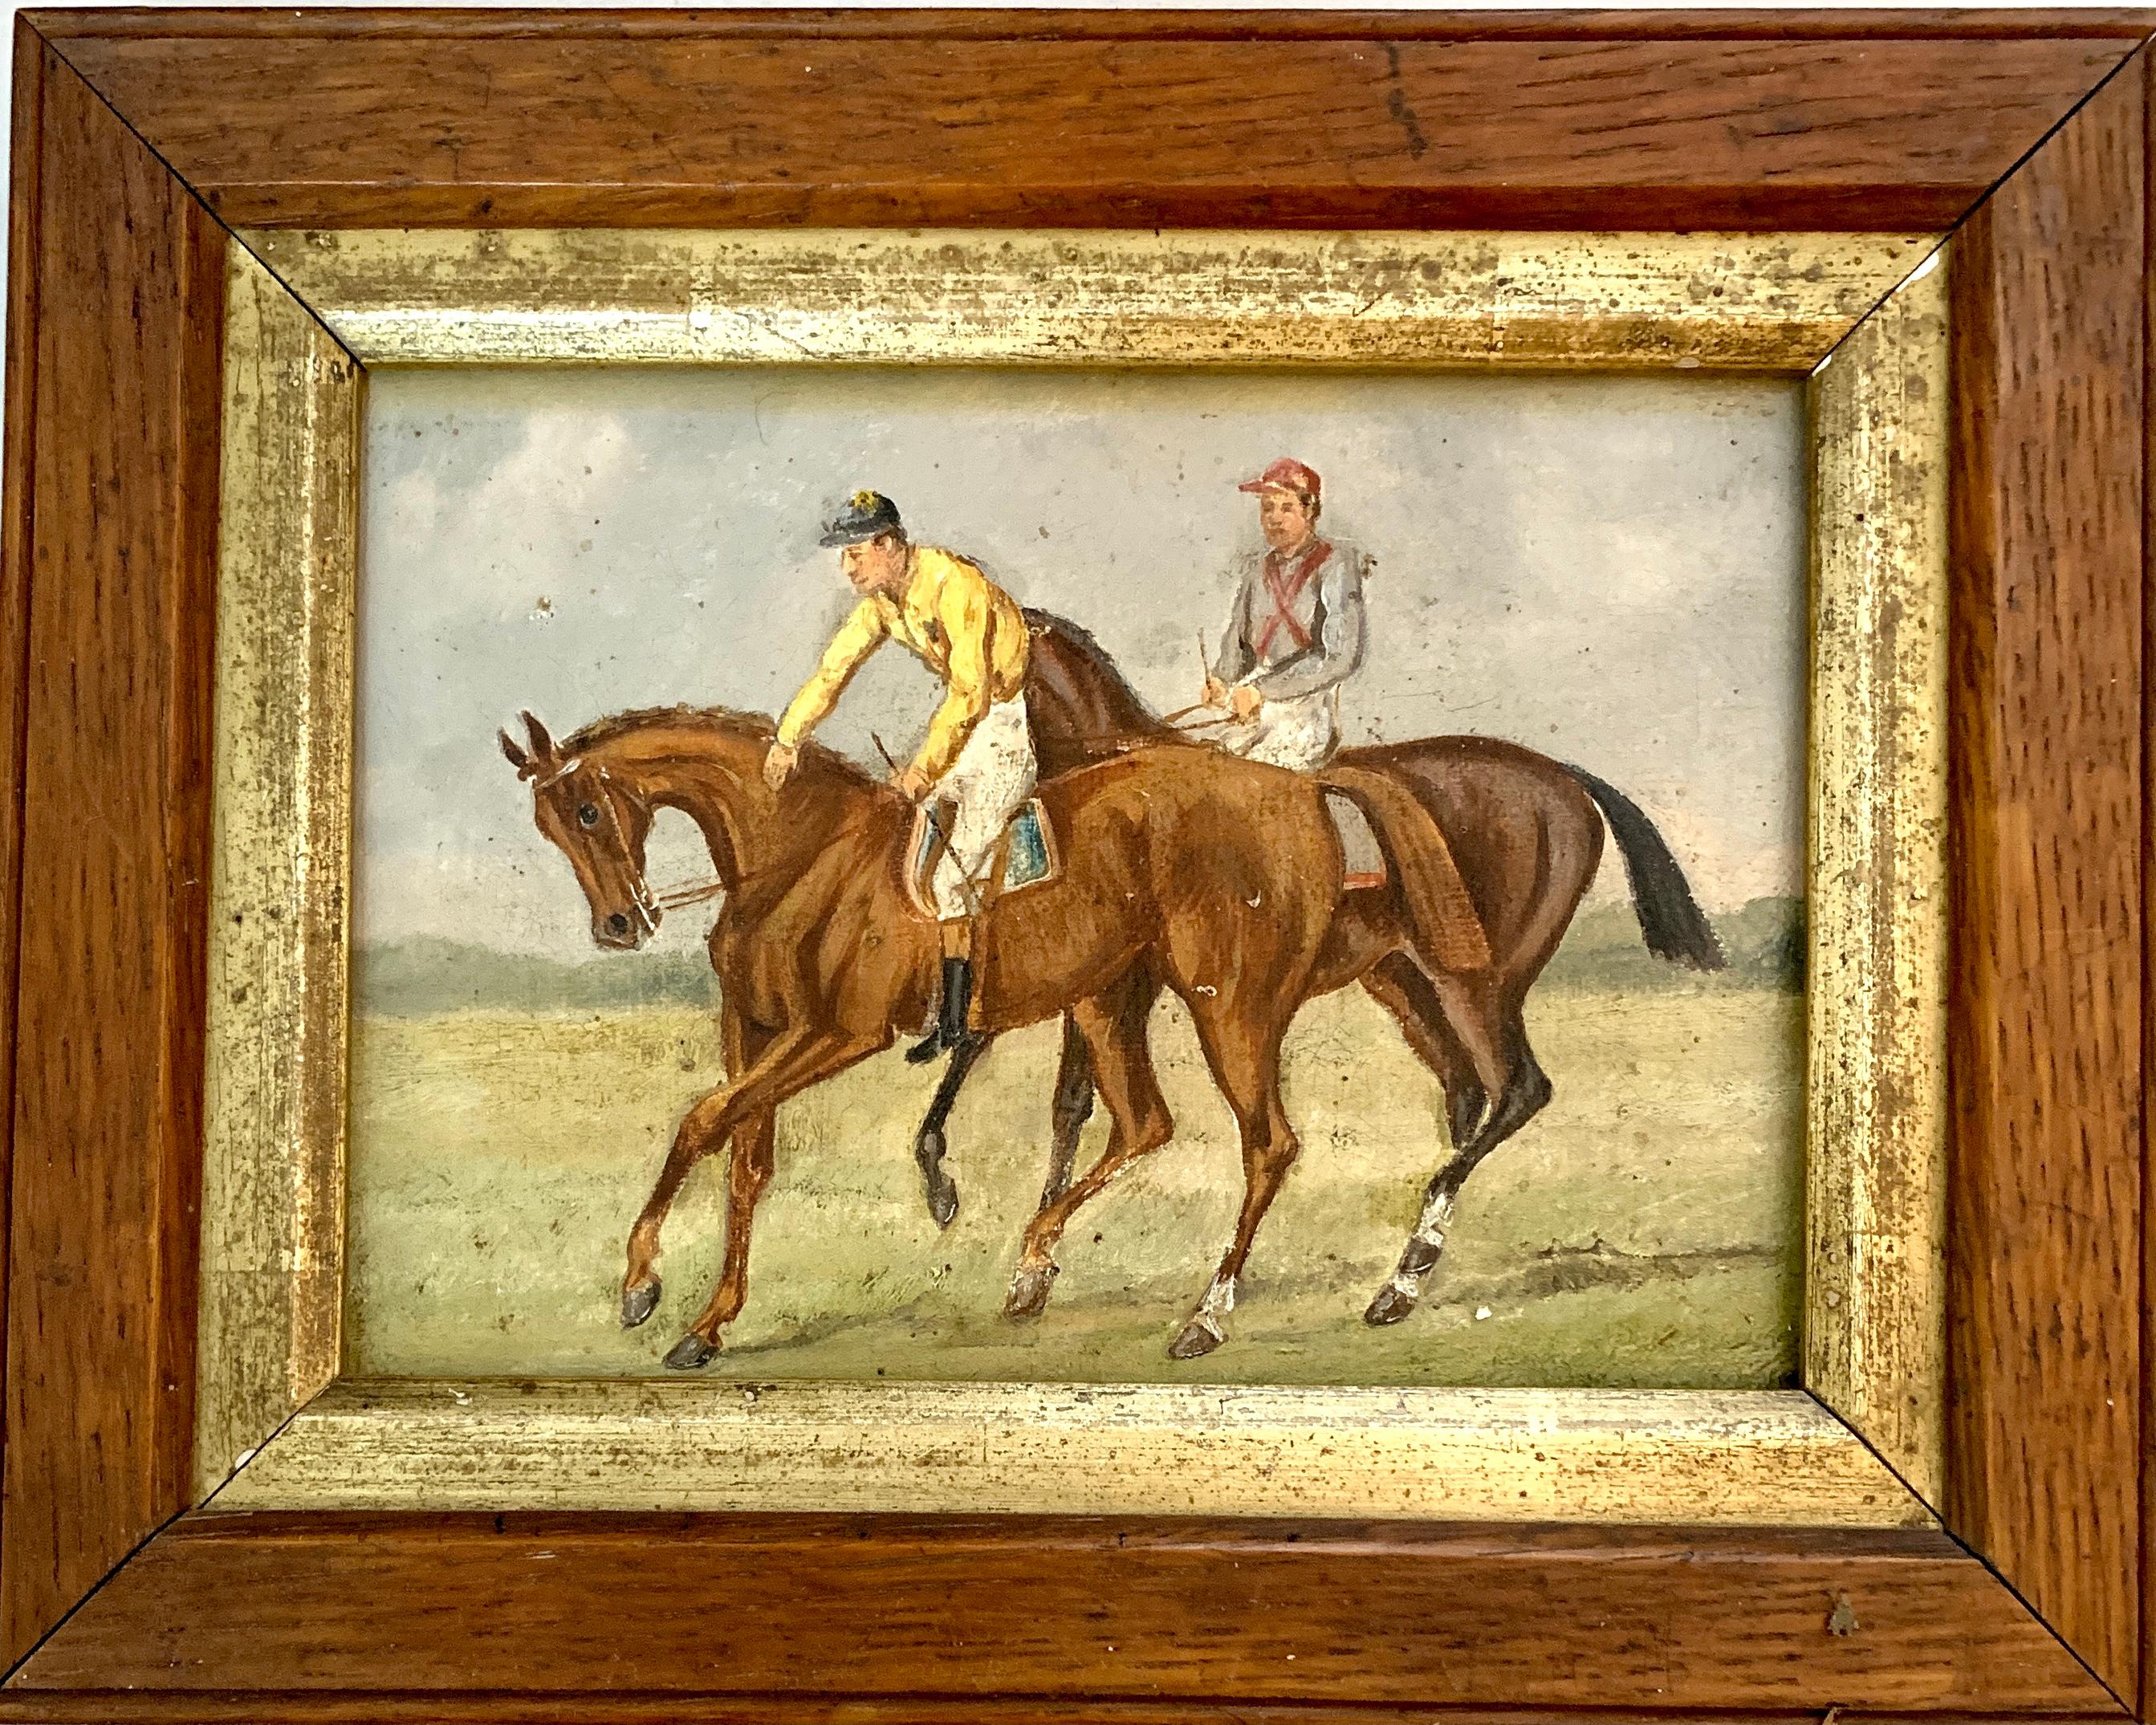 Unknown Figurative Painting - 19th century English Horse racing scene with jockeys on horse back in landscape